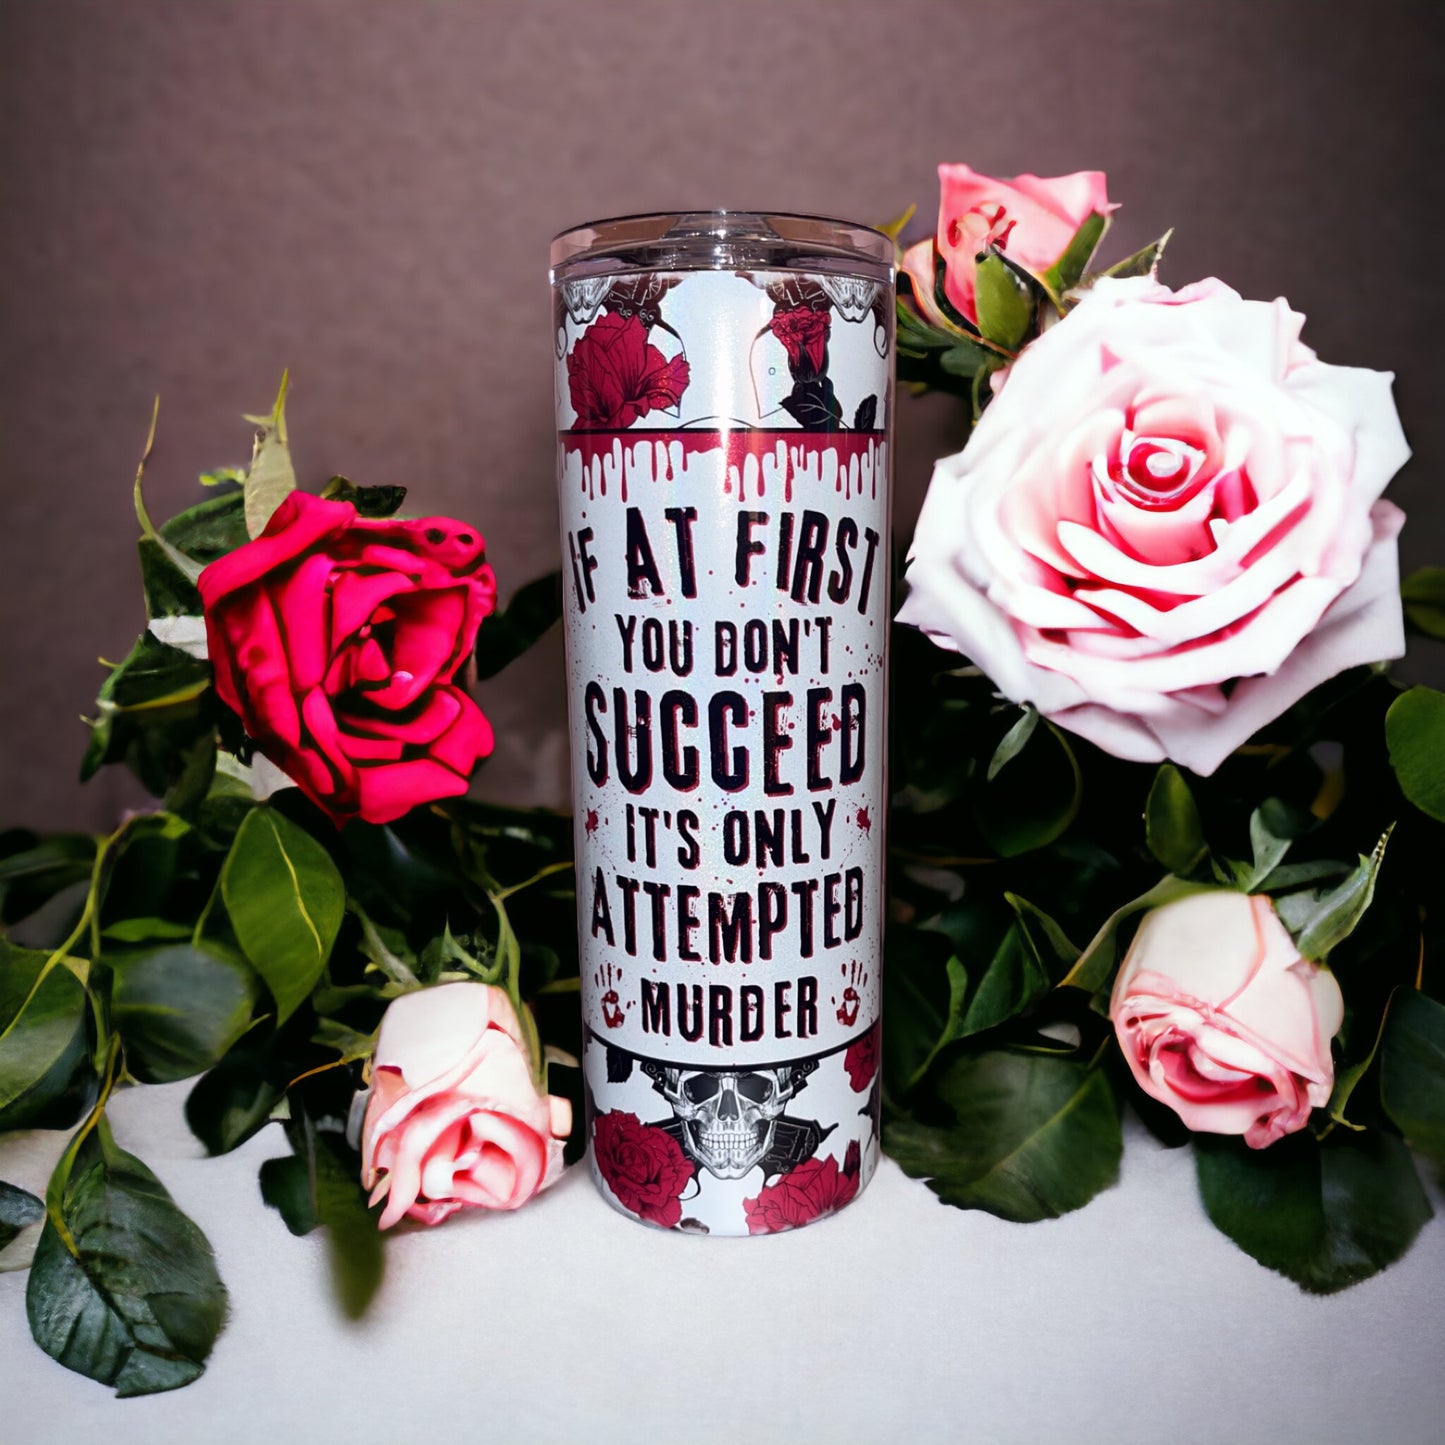 “If at First You Don’t Succeed, it’s Only Attempted Murder” Stainless Steel Tumbler - 20oz